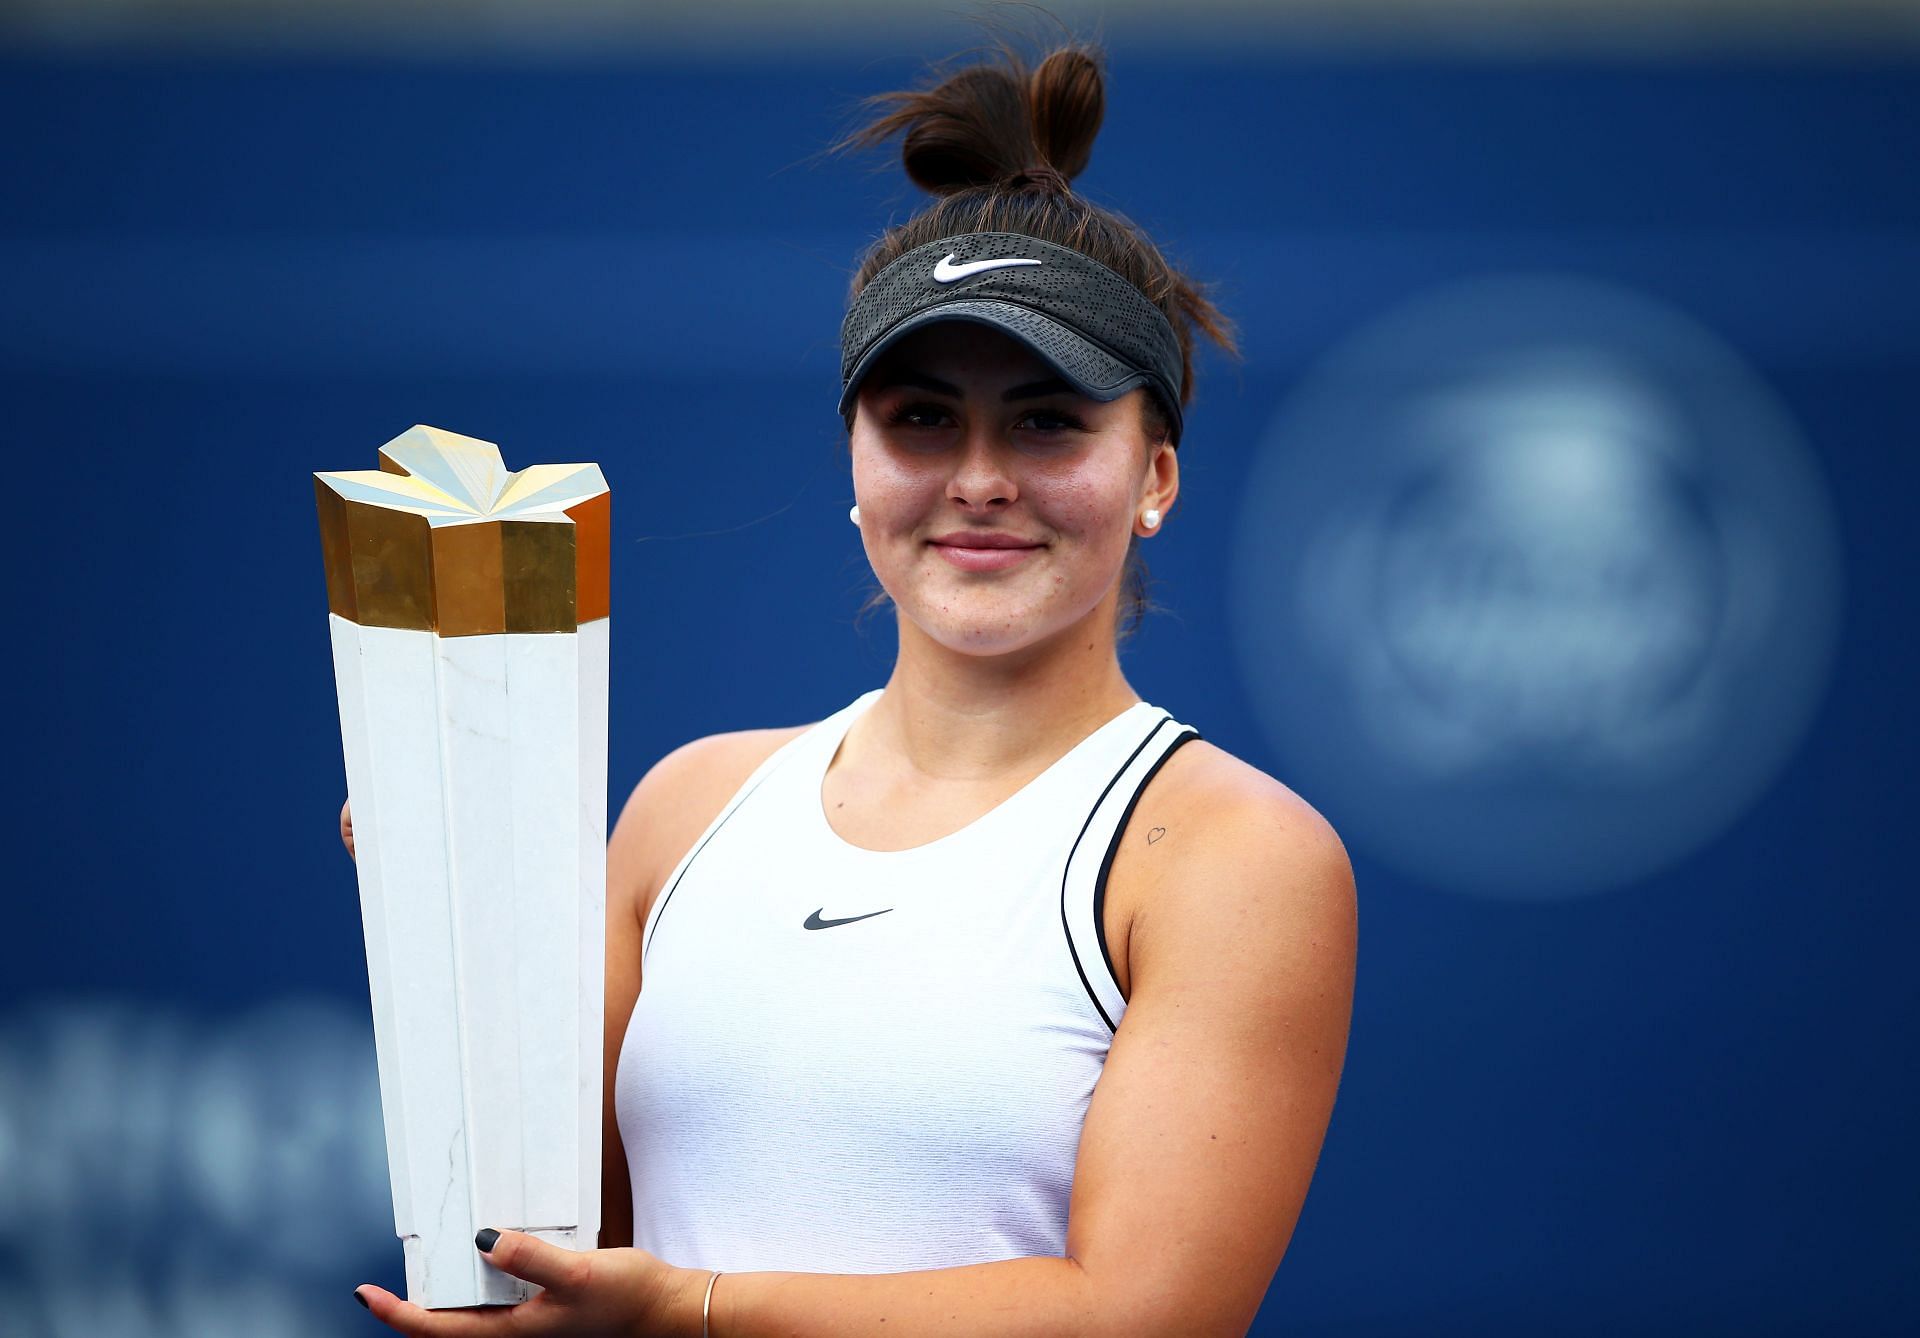 Bianca Andreescu  following her victory over Serena Williams at the 2019 Canadian Open